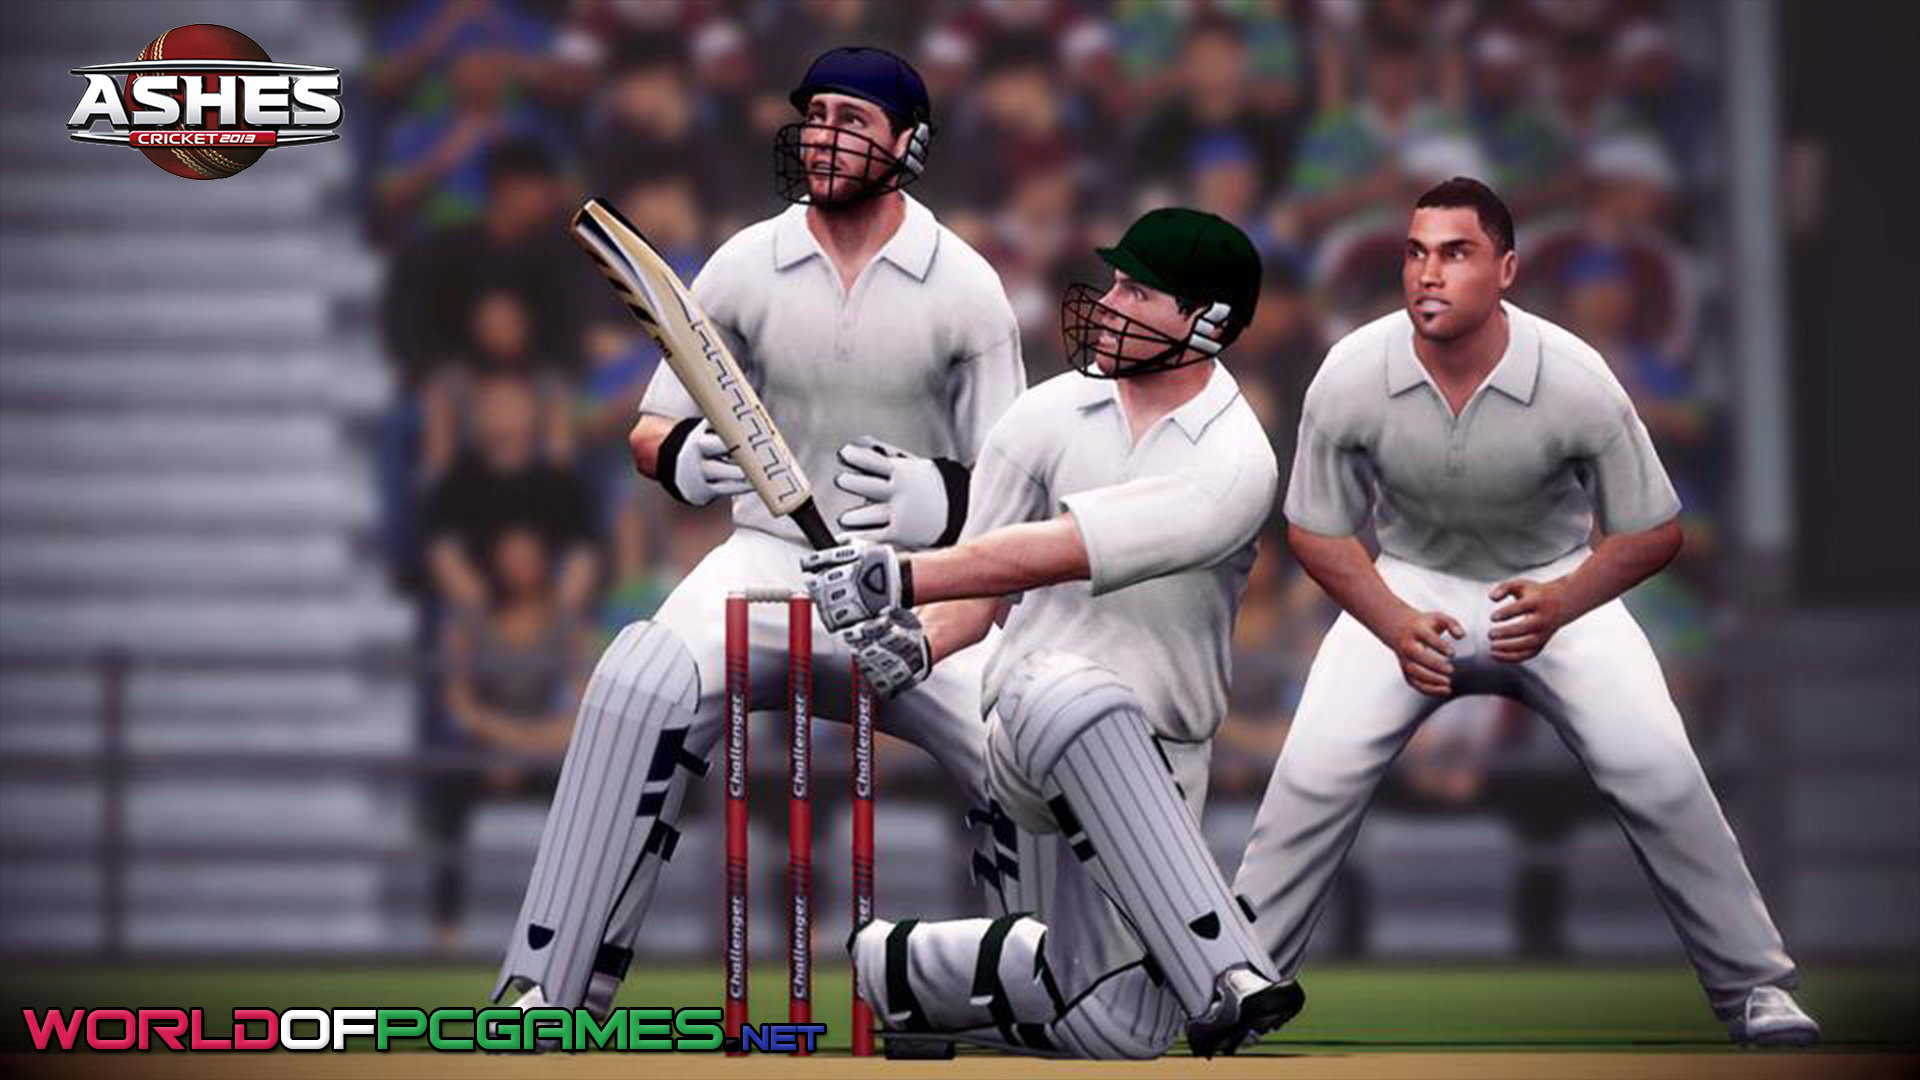 cricket games download pc games free download for windows 7